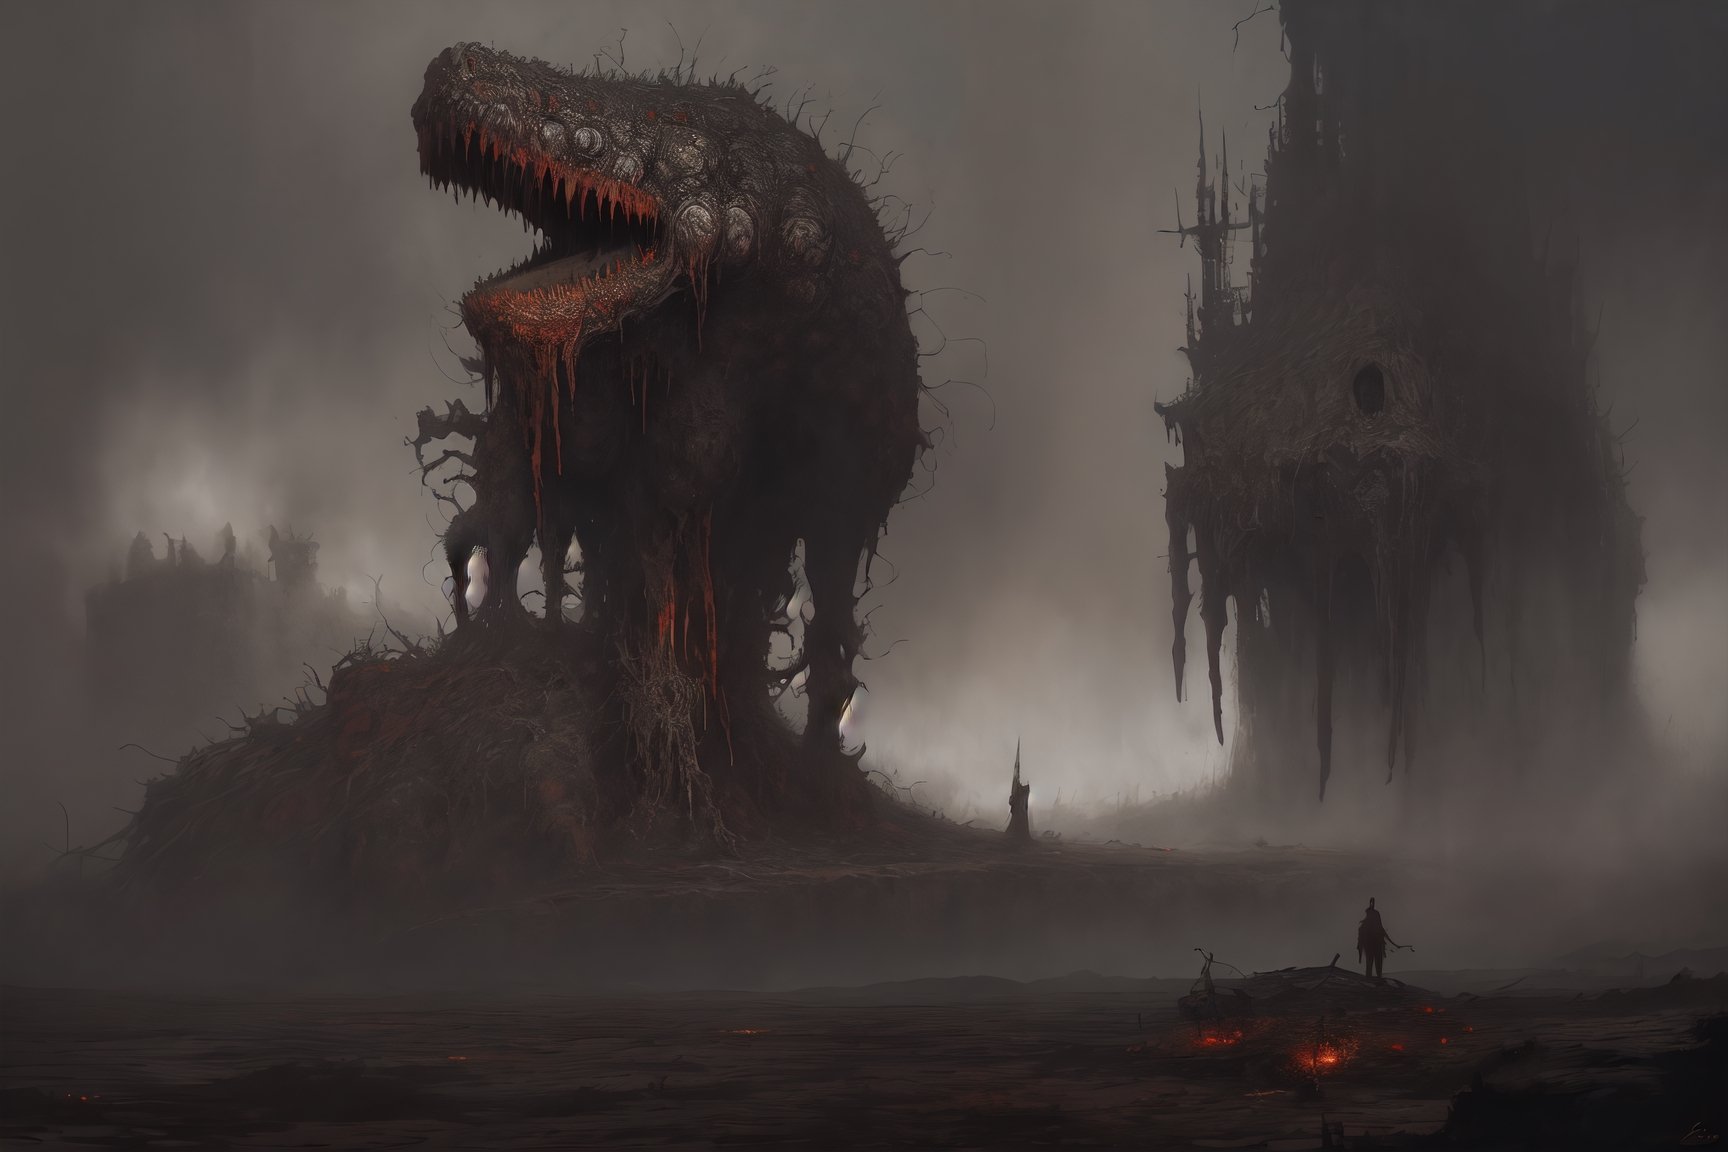 Painting made by Zdzislaw Beksinski, david and goliath, masterpiece, megalophobia, acid trip, perfect_loop, unsettling feel, oil painting on hardboard, dark sepia colors,fantasy00d